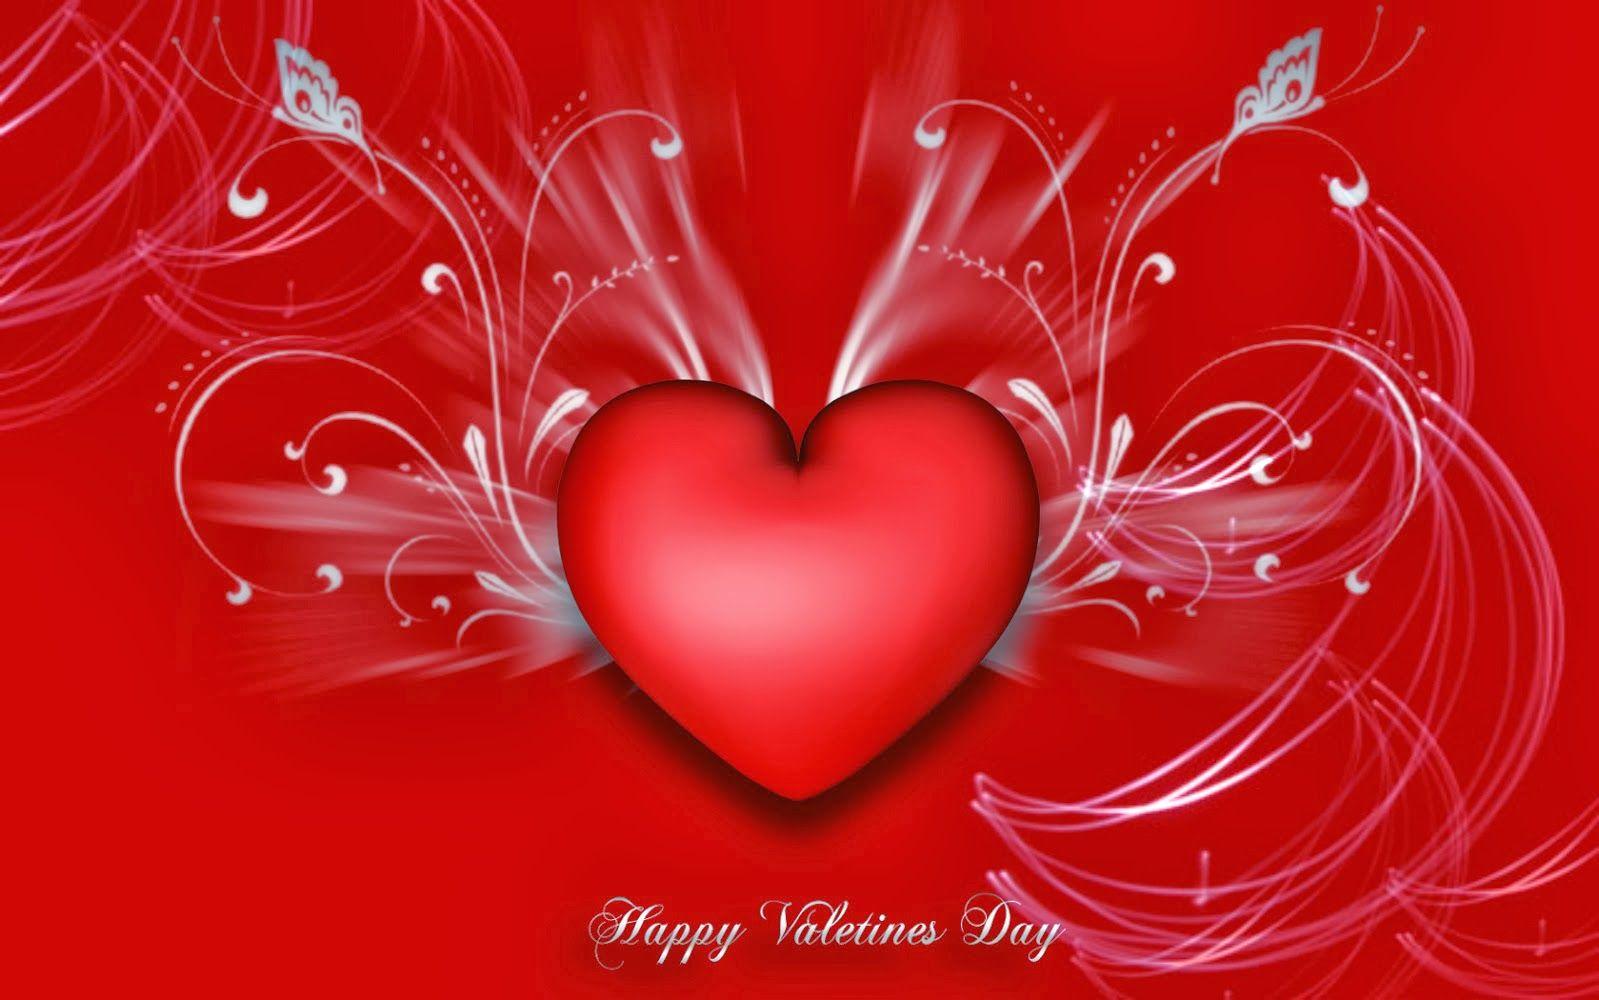 Red Heart 3D Happy Valentine's Day HD PIC. Valentine Day. Happy